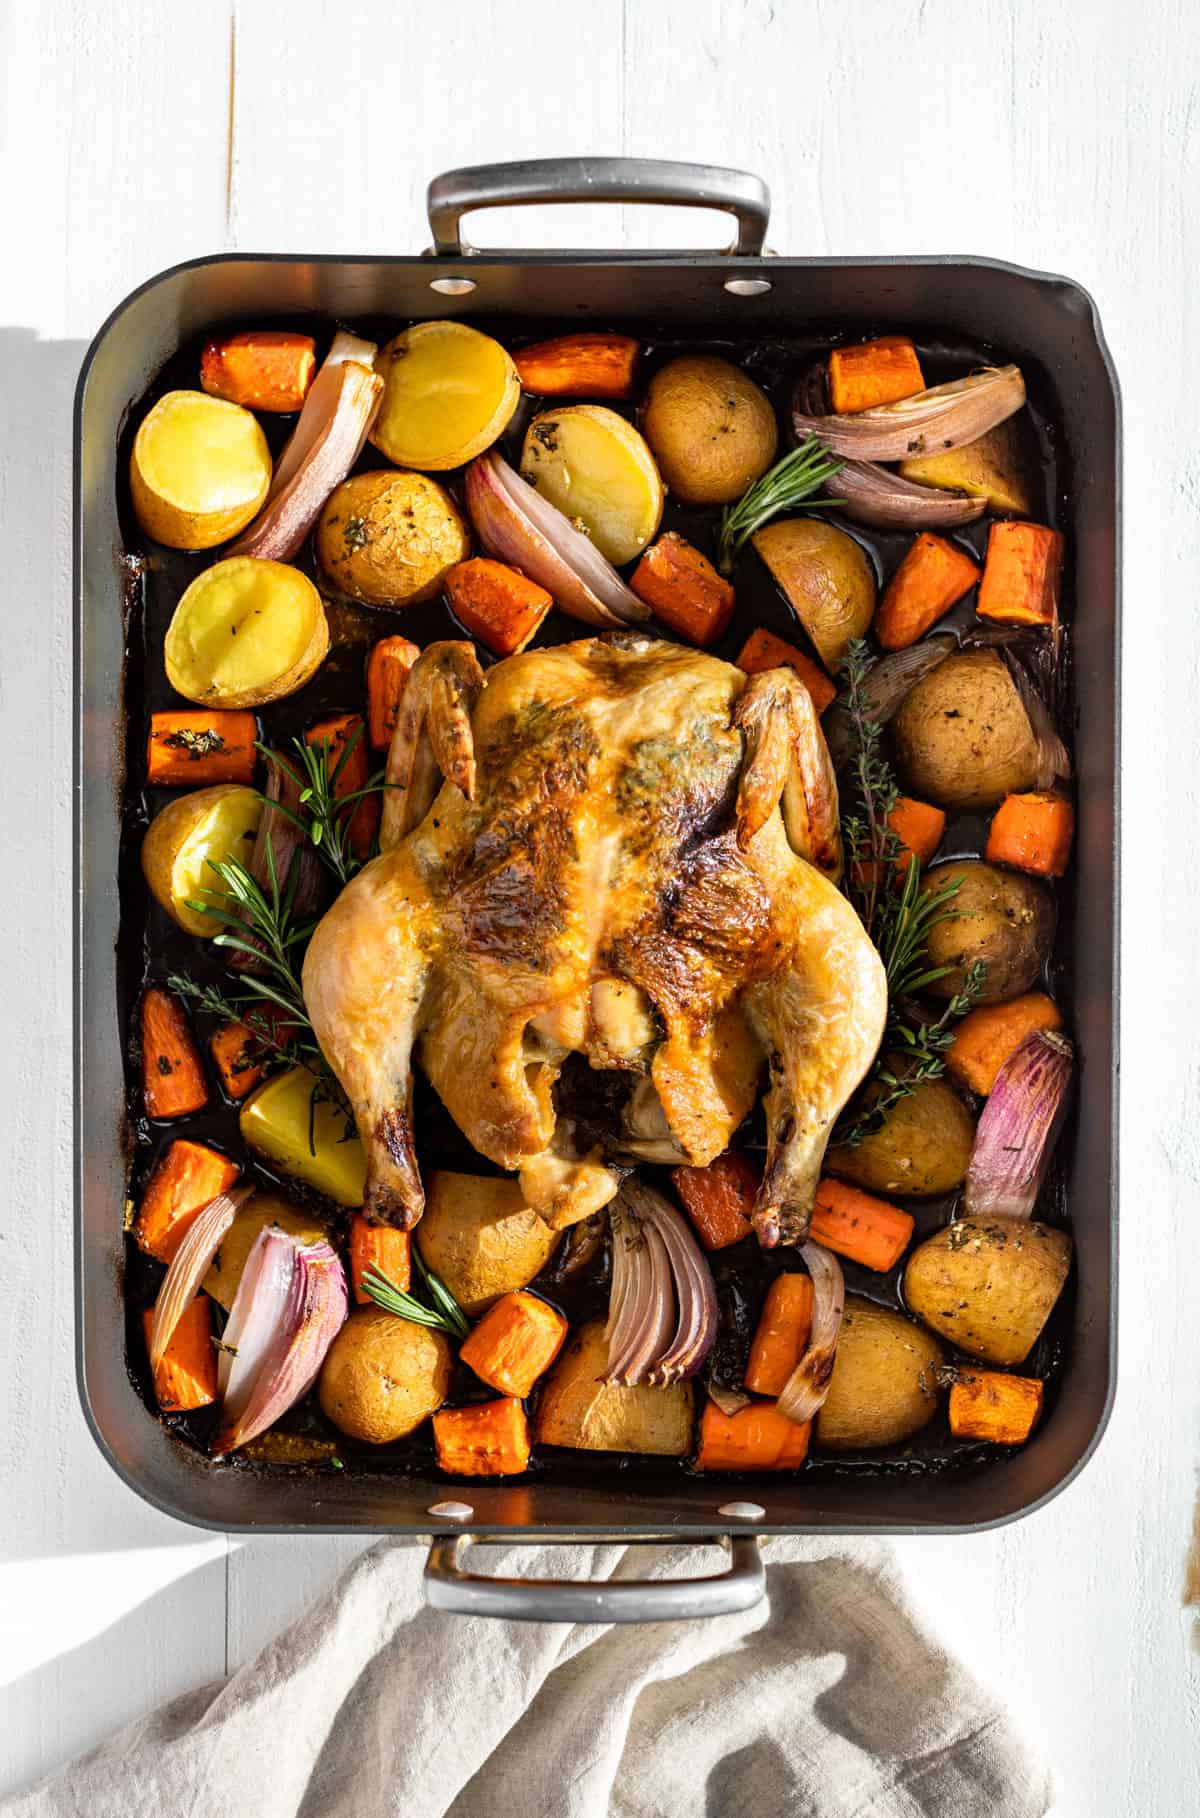 Straight down view of a whole roasted chicken with carrots, potatoes, and onions in a grey roaster.